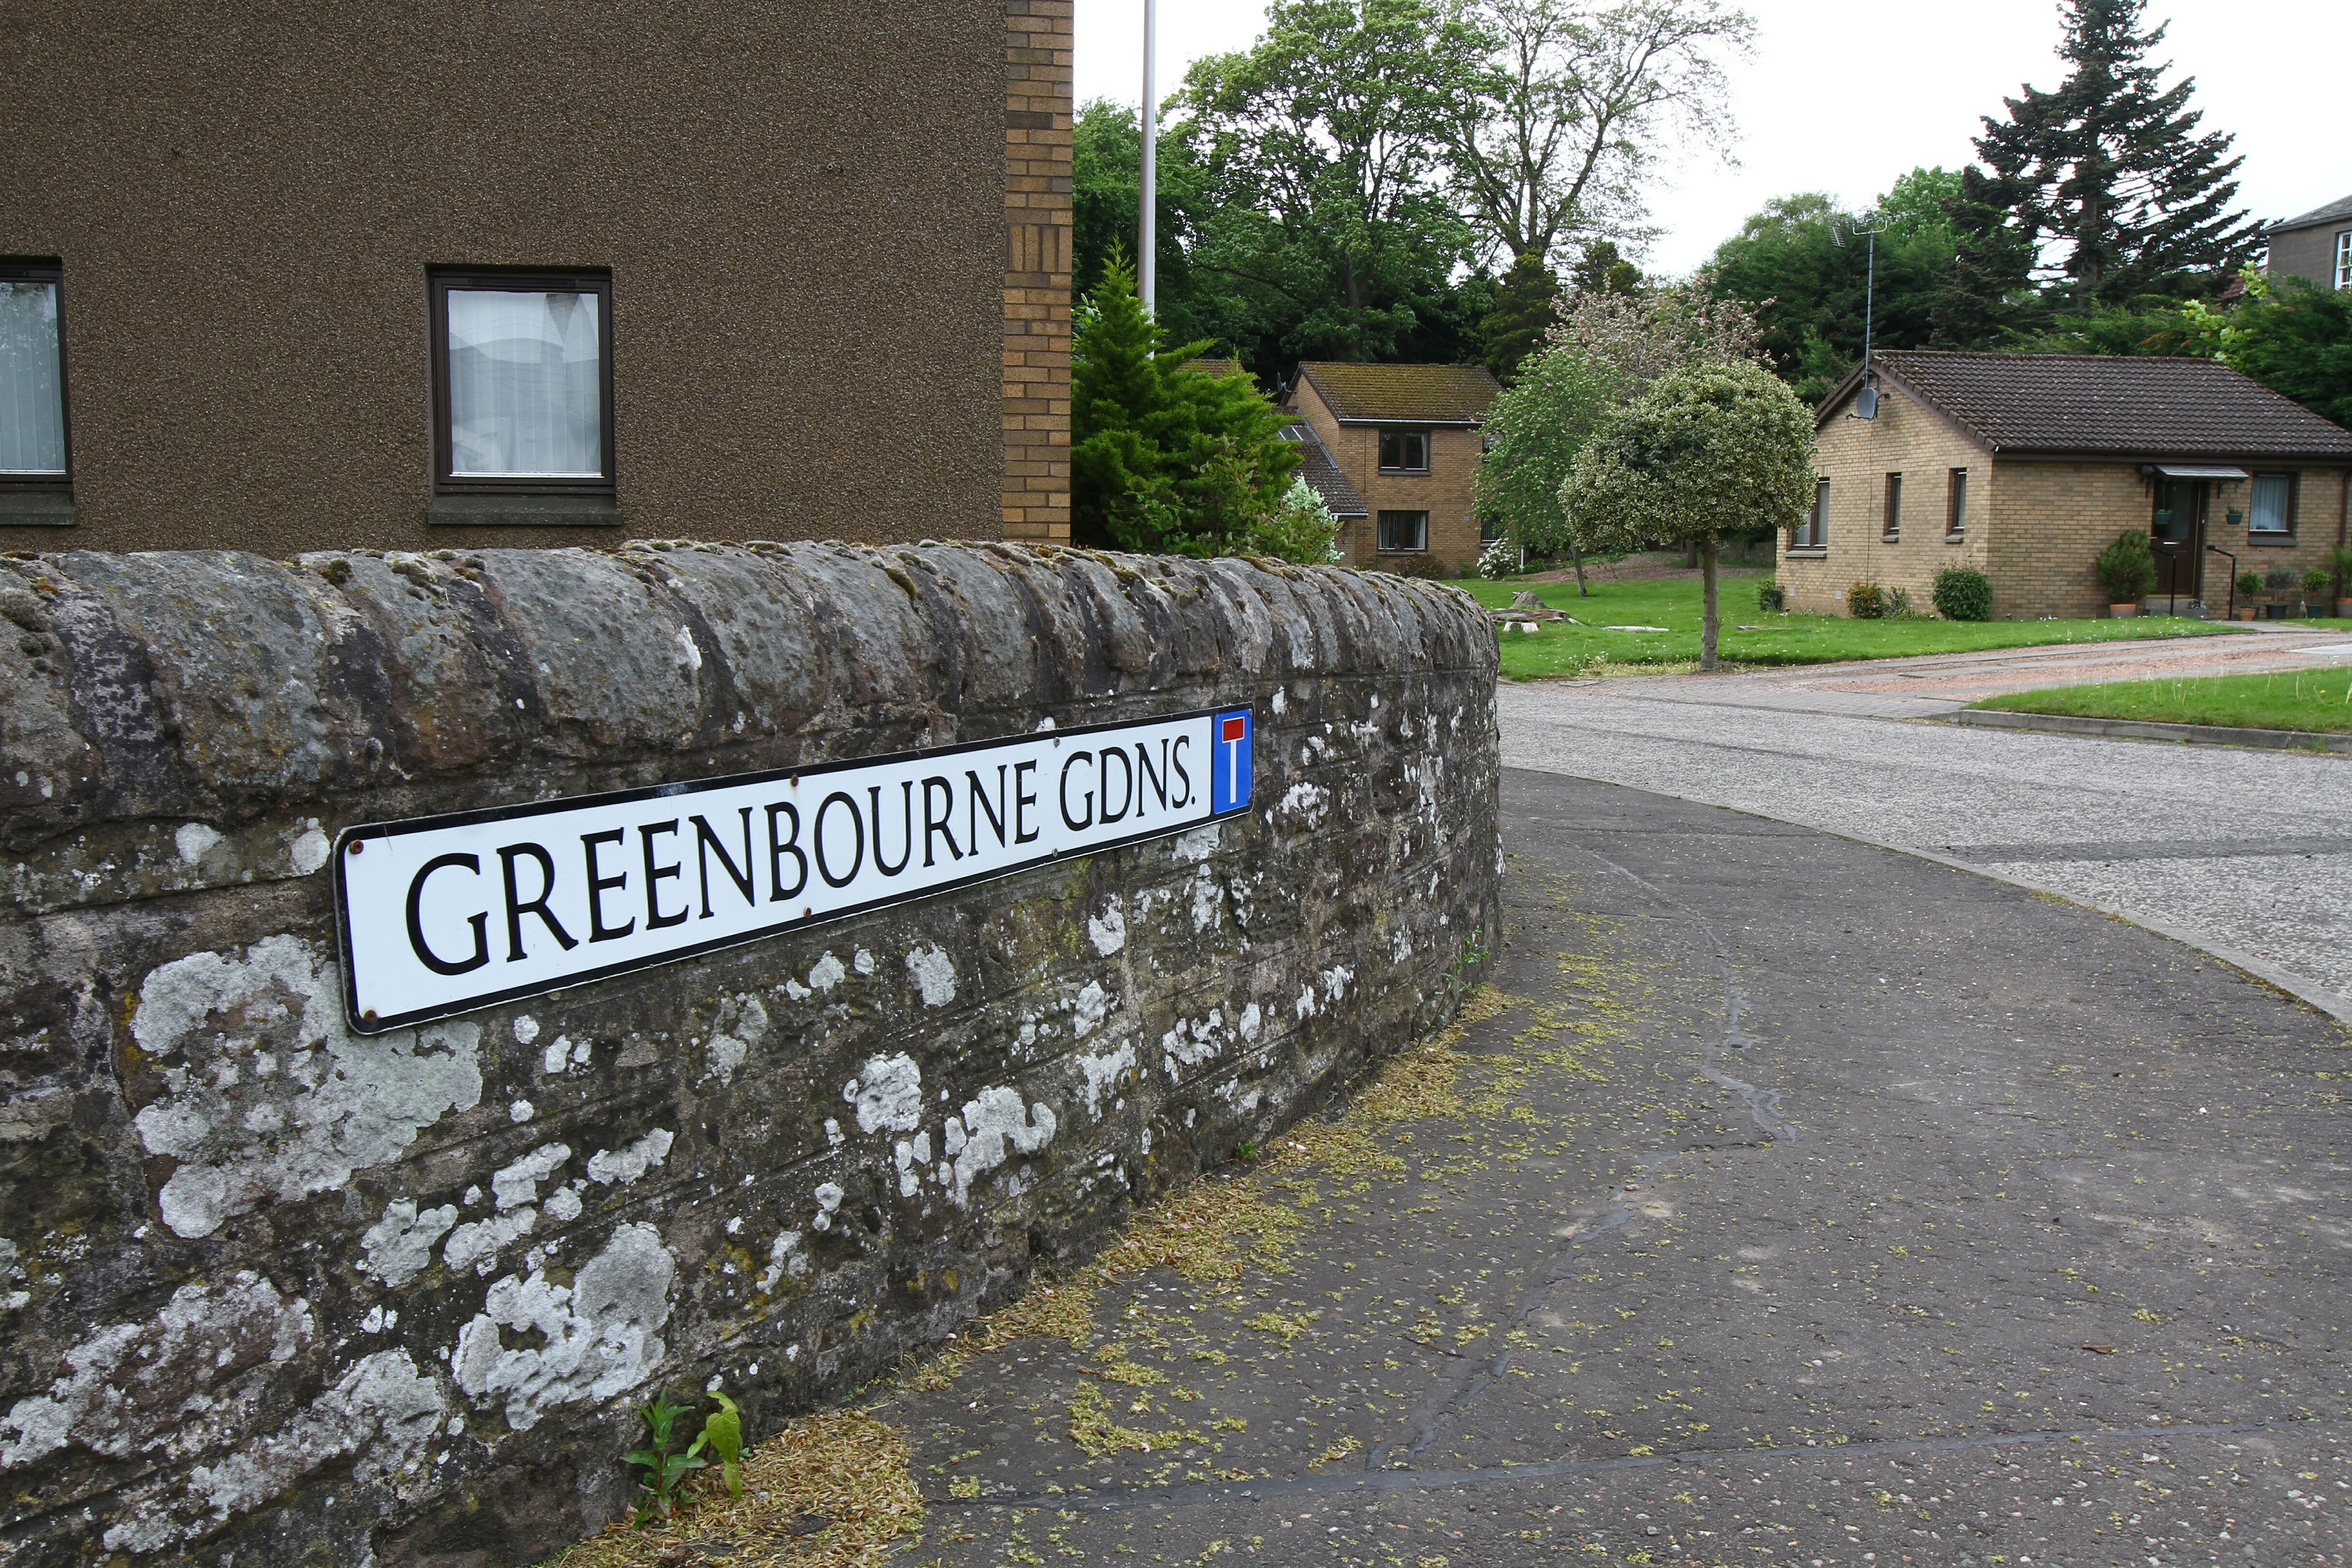 The sheltered housing at Greenbourne Gardens in Monifieth.